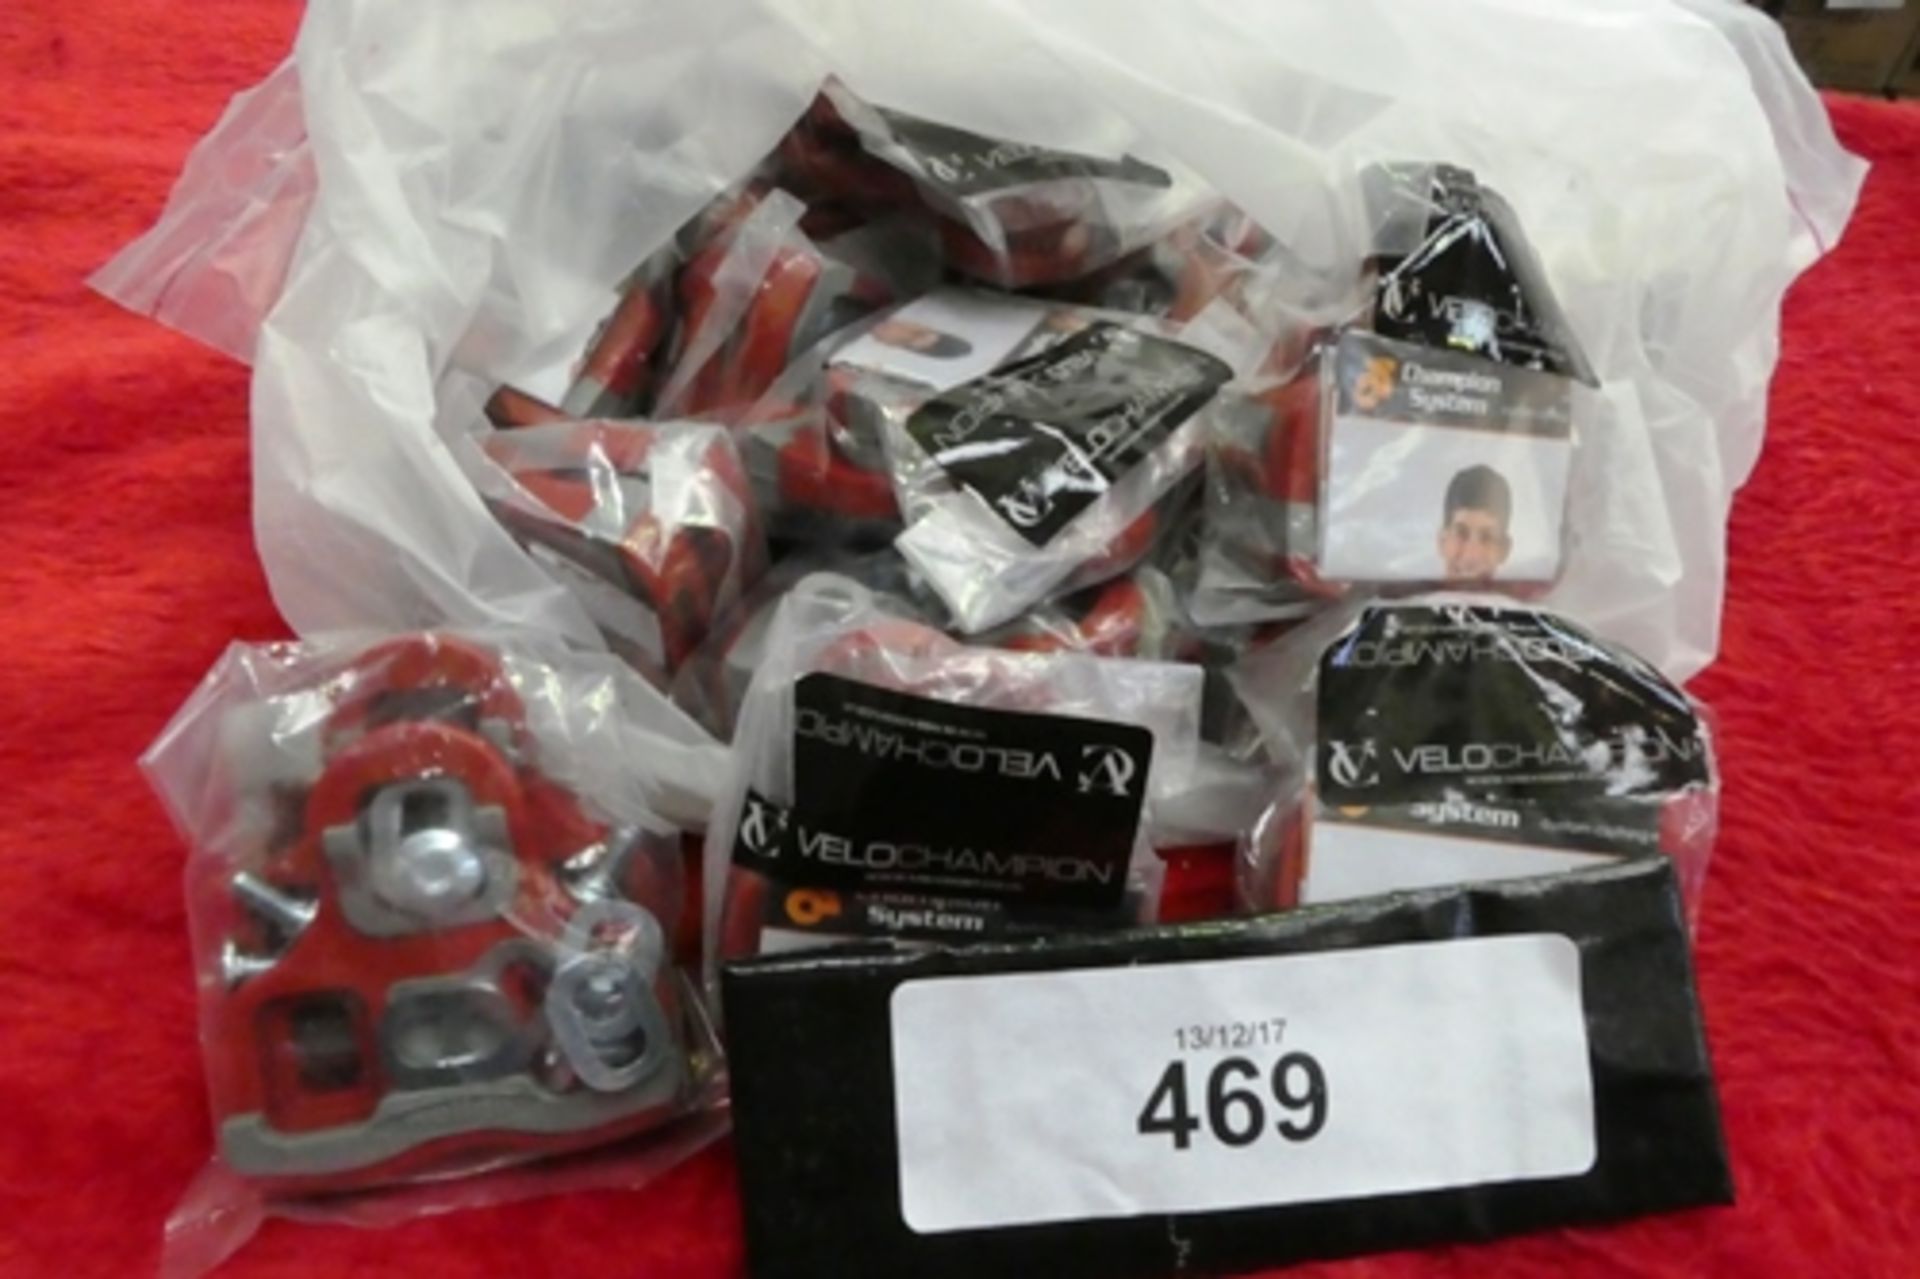 25 x Velochampion Look Keo grip pedal cleats, 6 degree, float red, RRP £13 each - Sealed new (FC10)